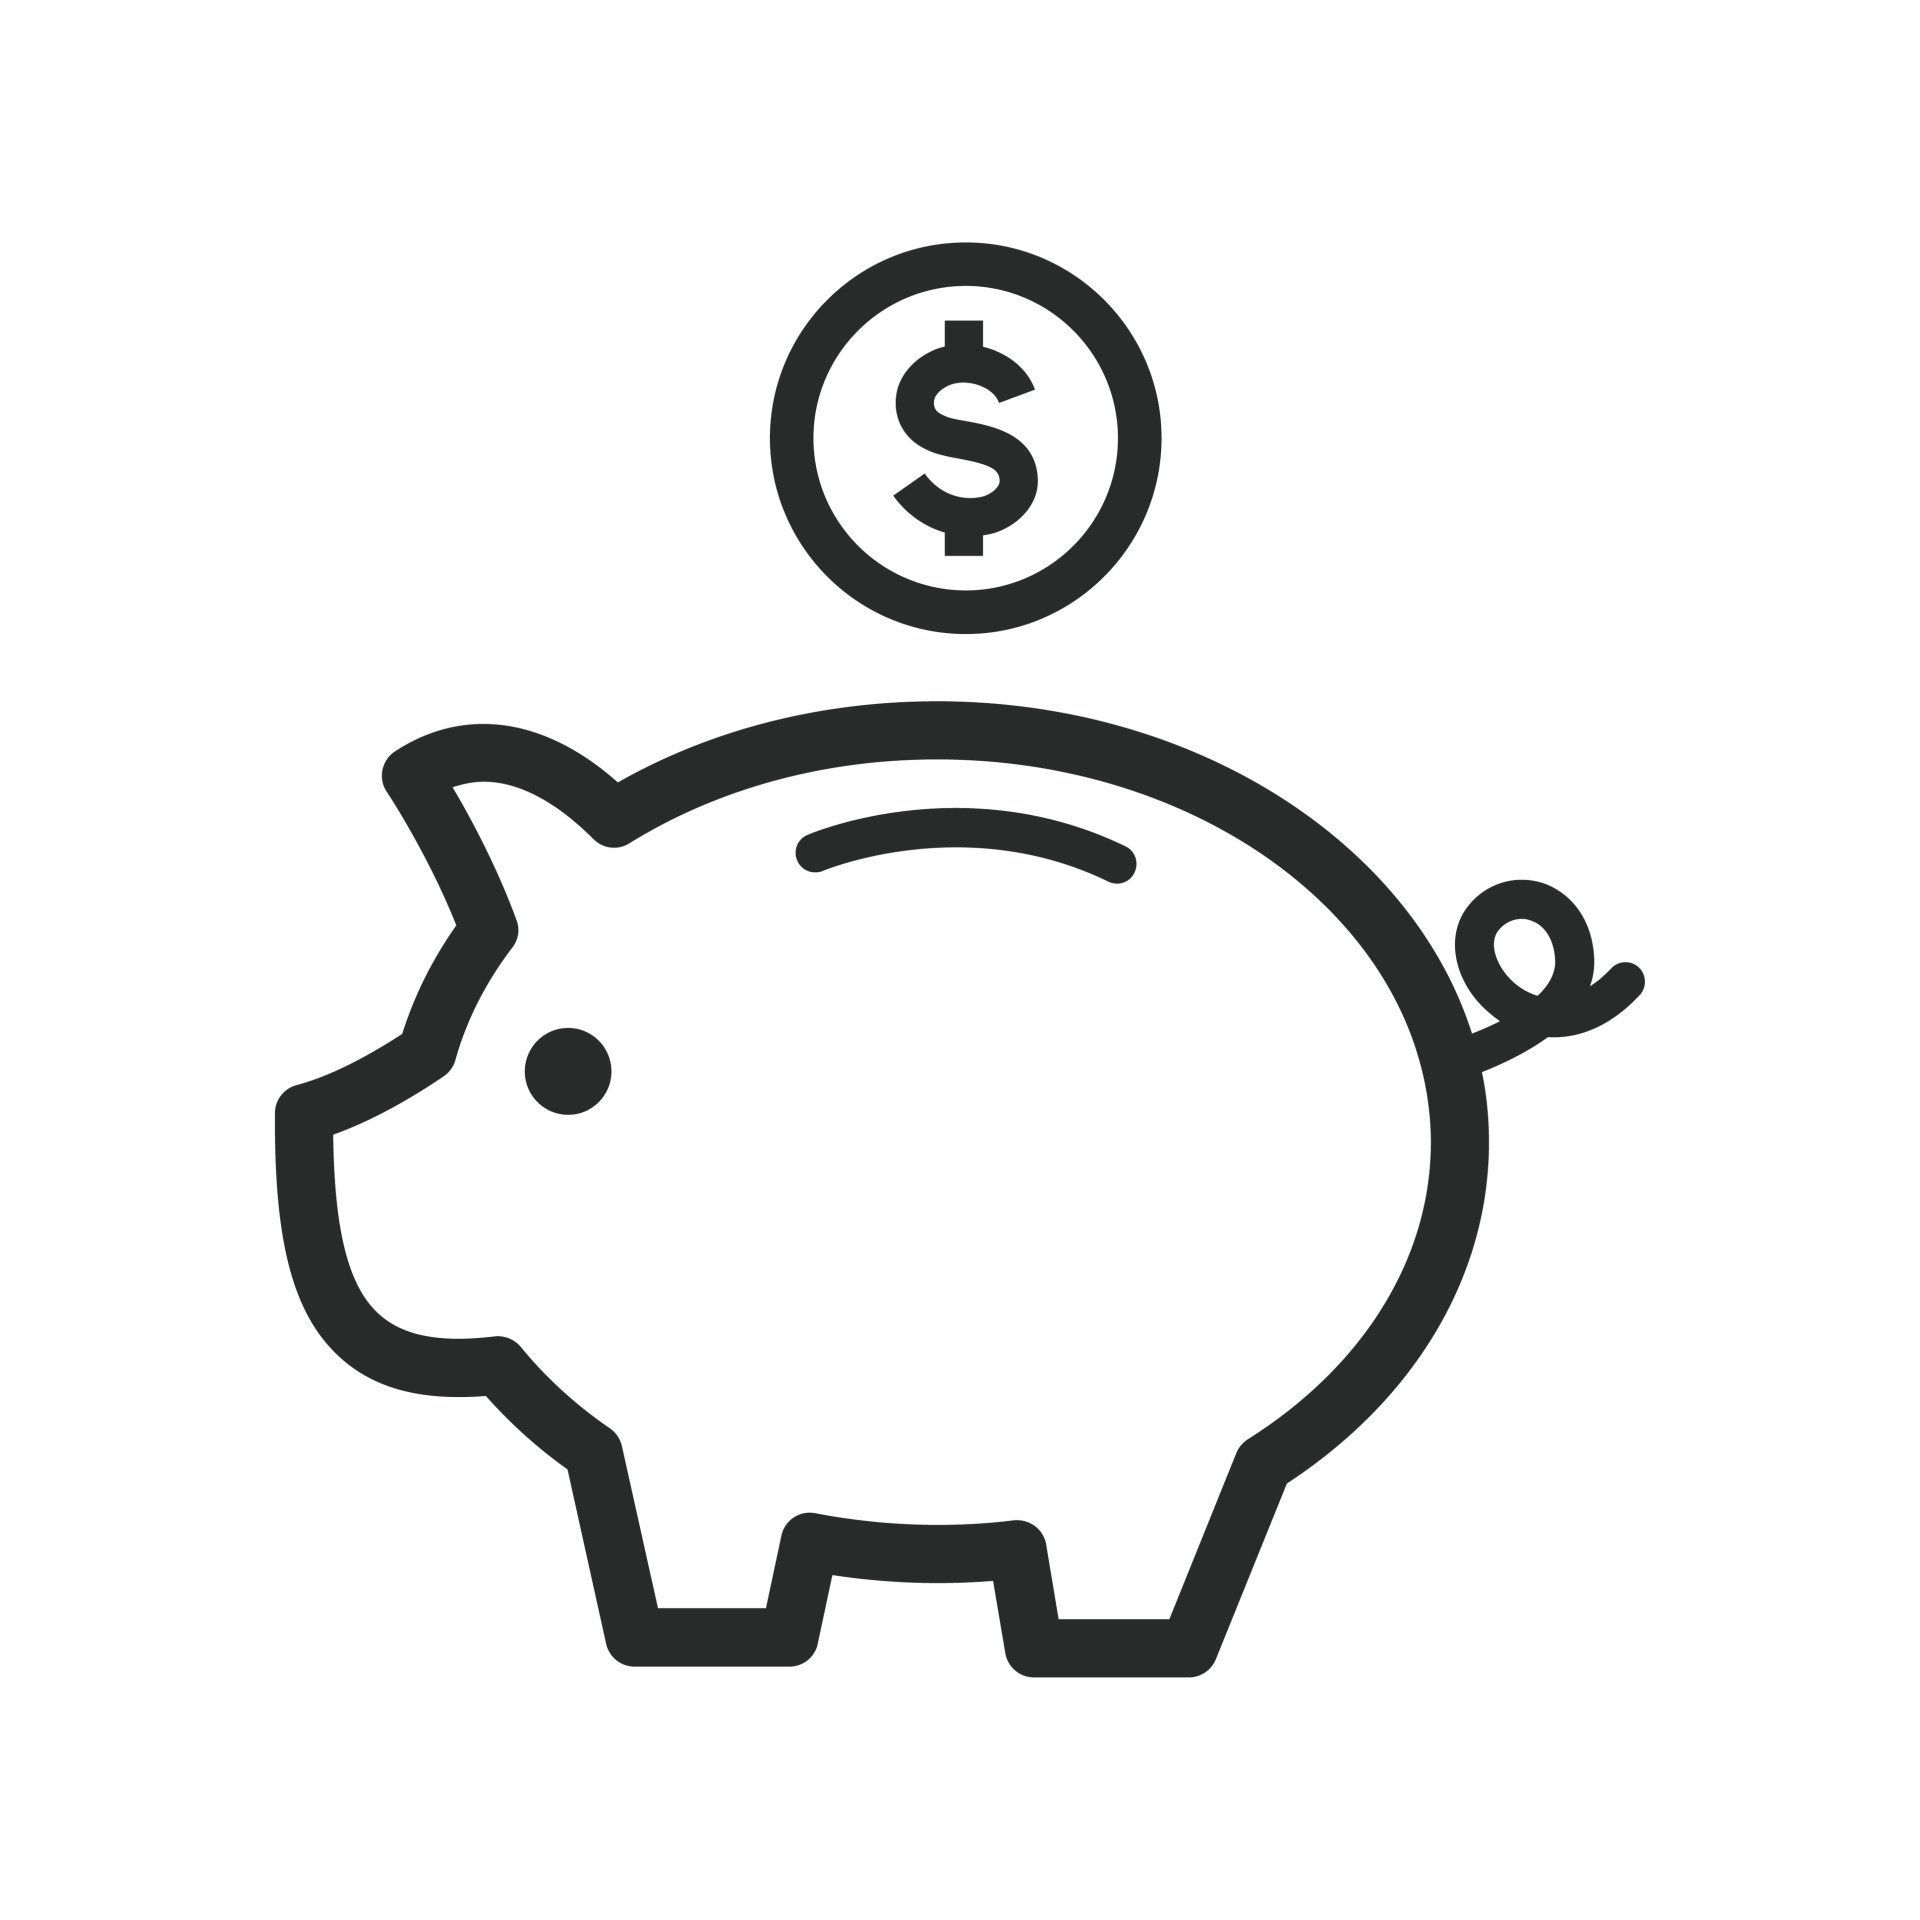 A piggy bank icon with a dollar sign, emphasizing expense control.